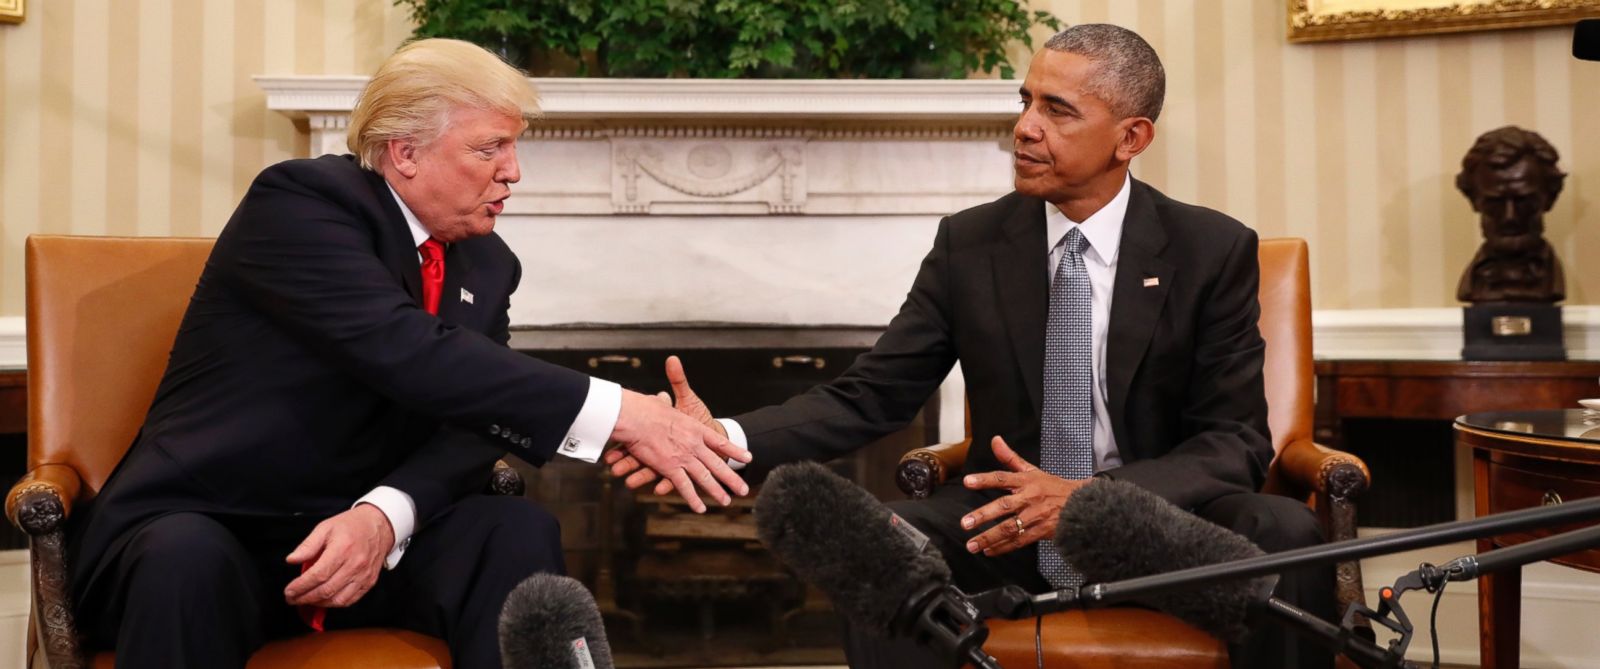 Obama told Trump: "If you succeed, the country succeeds," as the two men sat in high-backed chairs in front of the fireplace in the Oval Office.